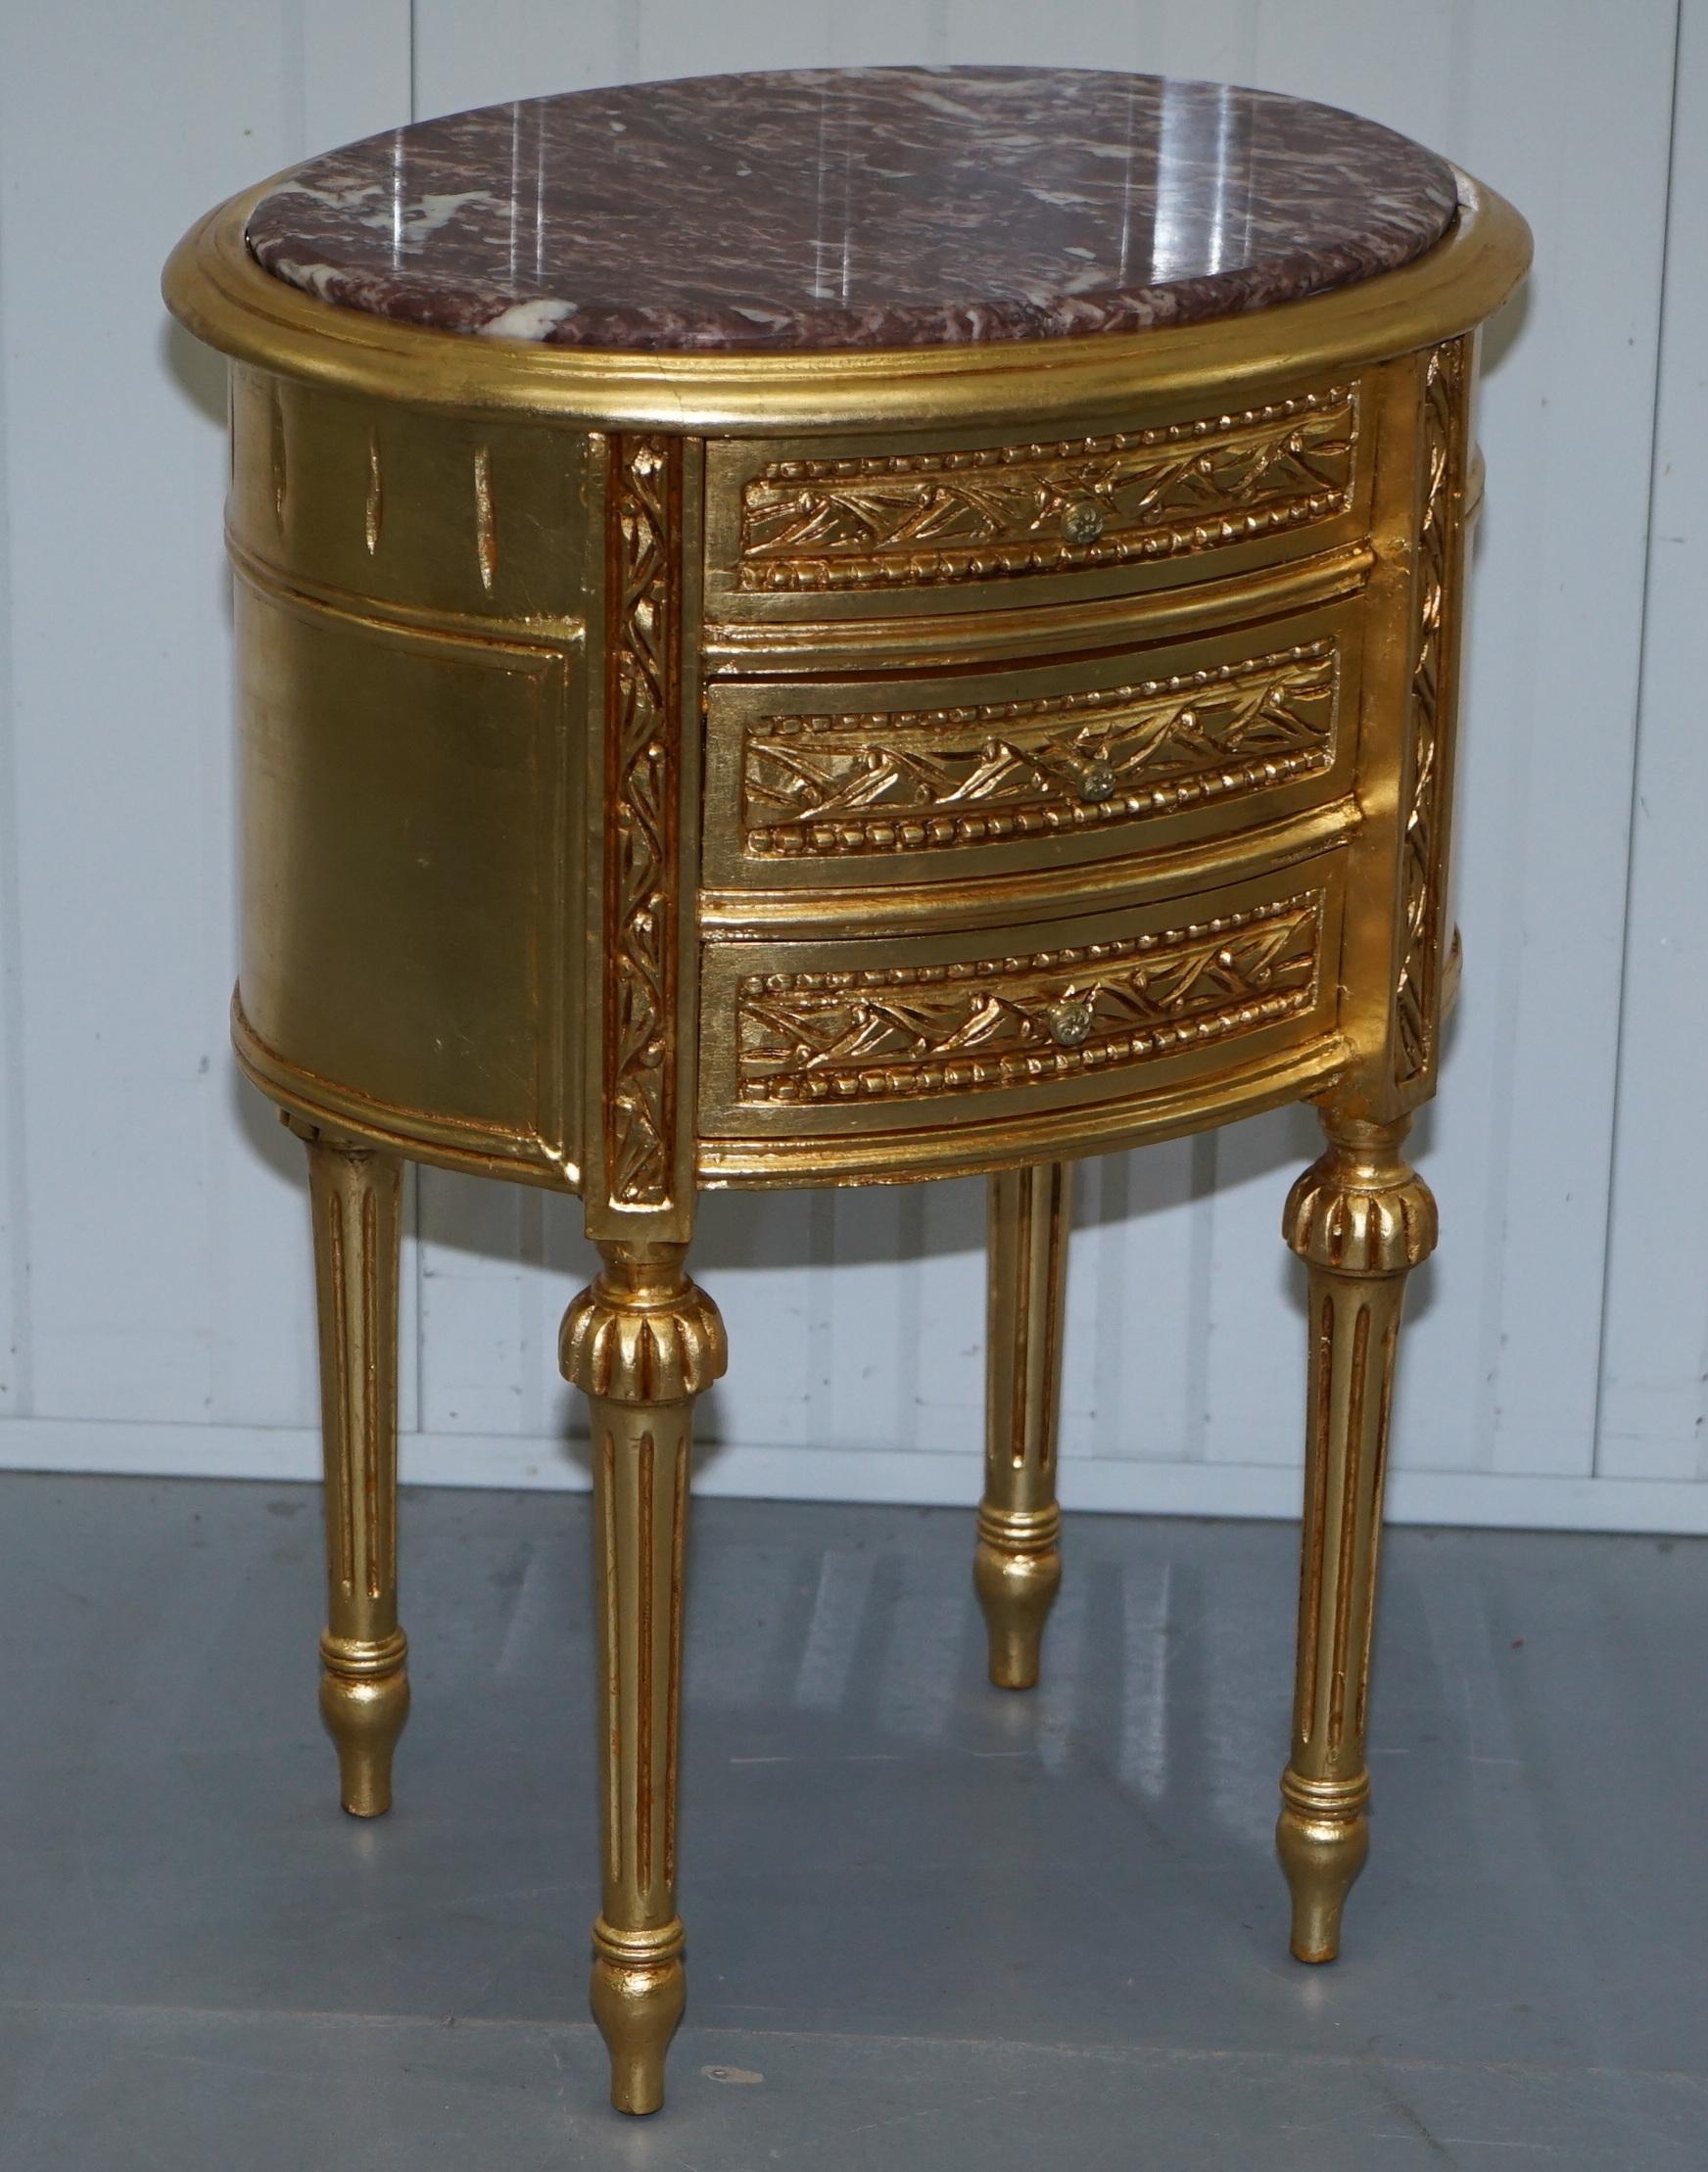 We are delighted to offer for sale this lovely pair of French giltwood side tables each with three drawers and a solid marble top

A good looking and well made decorative pair, versatile as lamp, wine or side end tables 

They have been deep